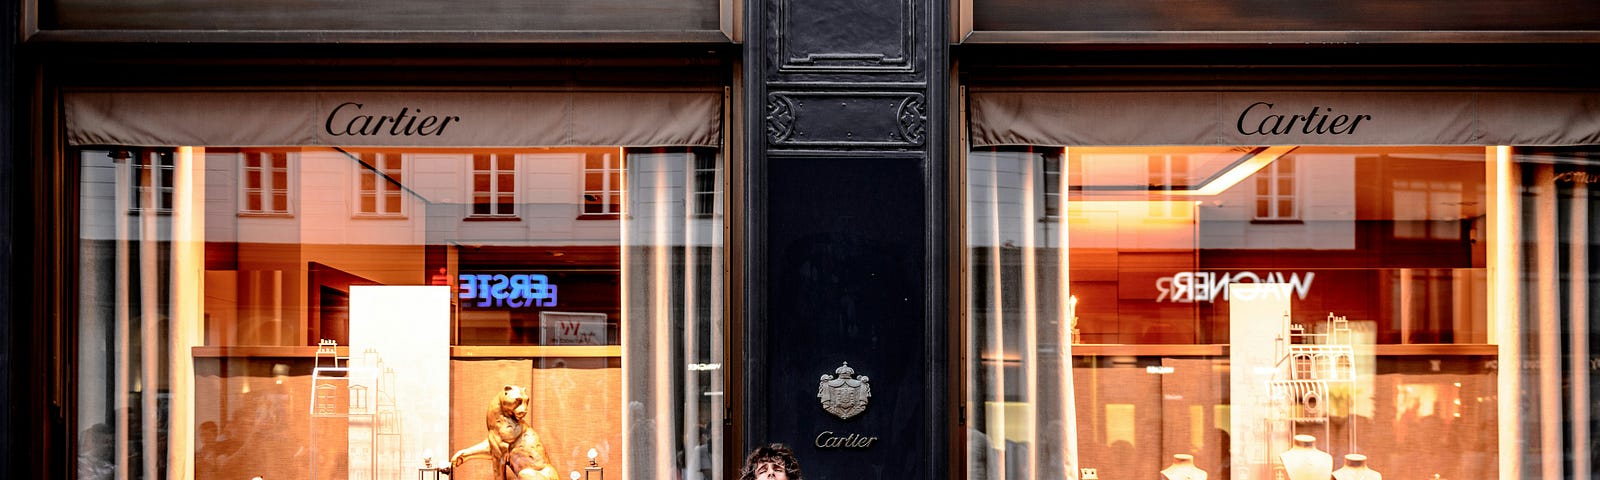 A young man playing the cello in front of a Cartier store